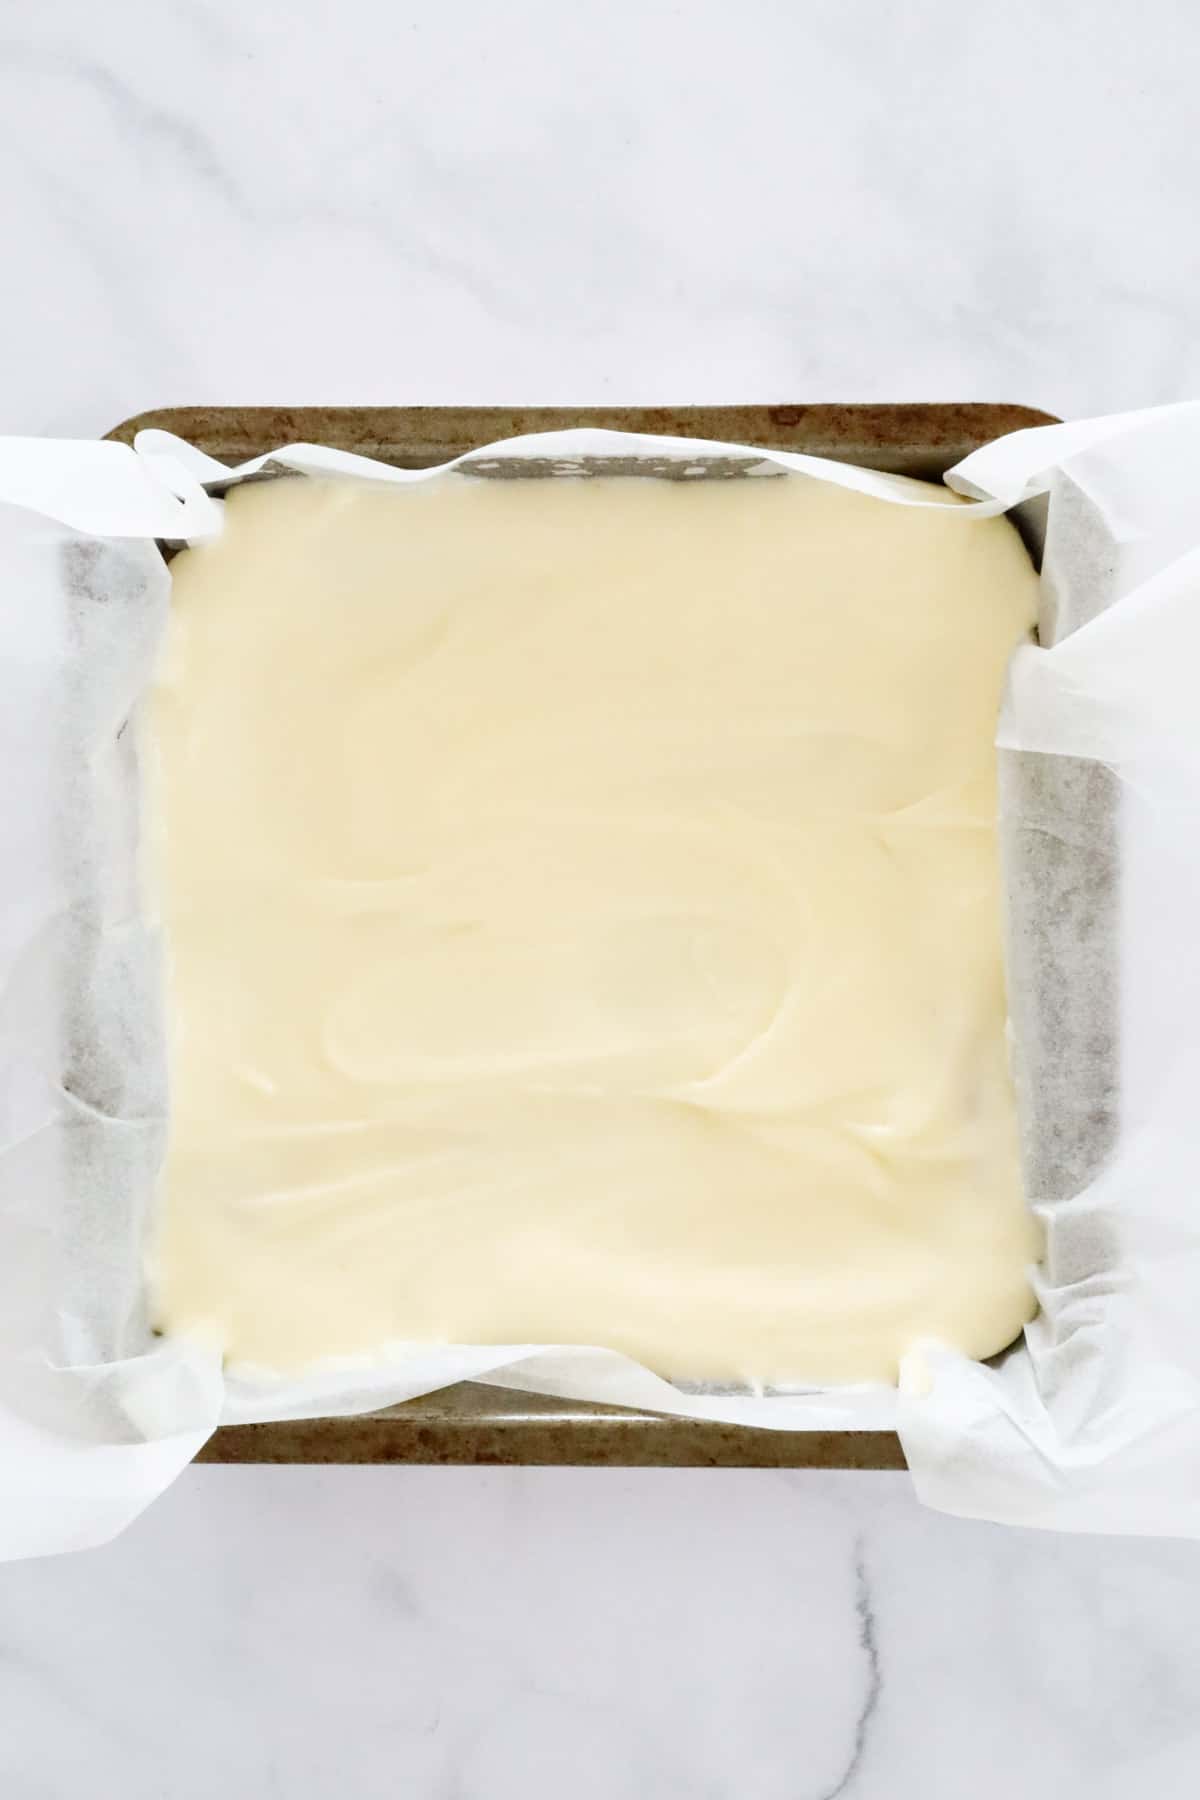 Lemon frosting spread over baked base in a lined baking tin.